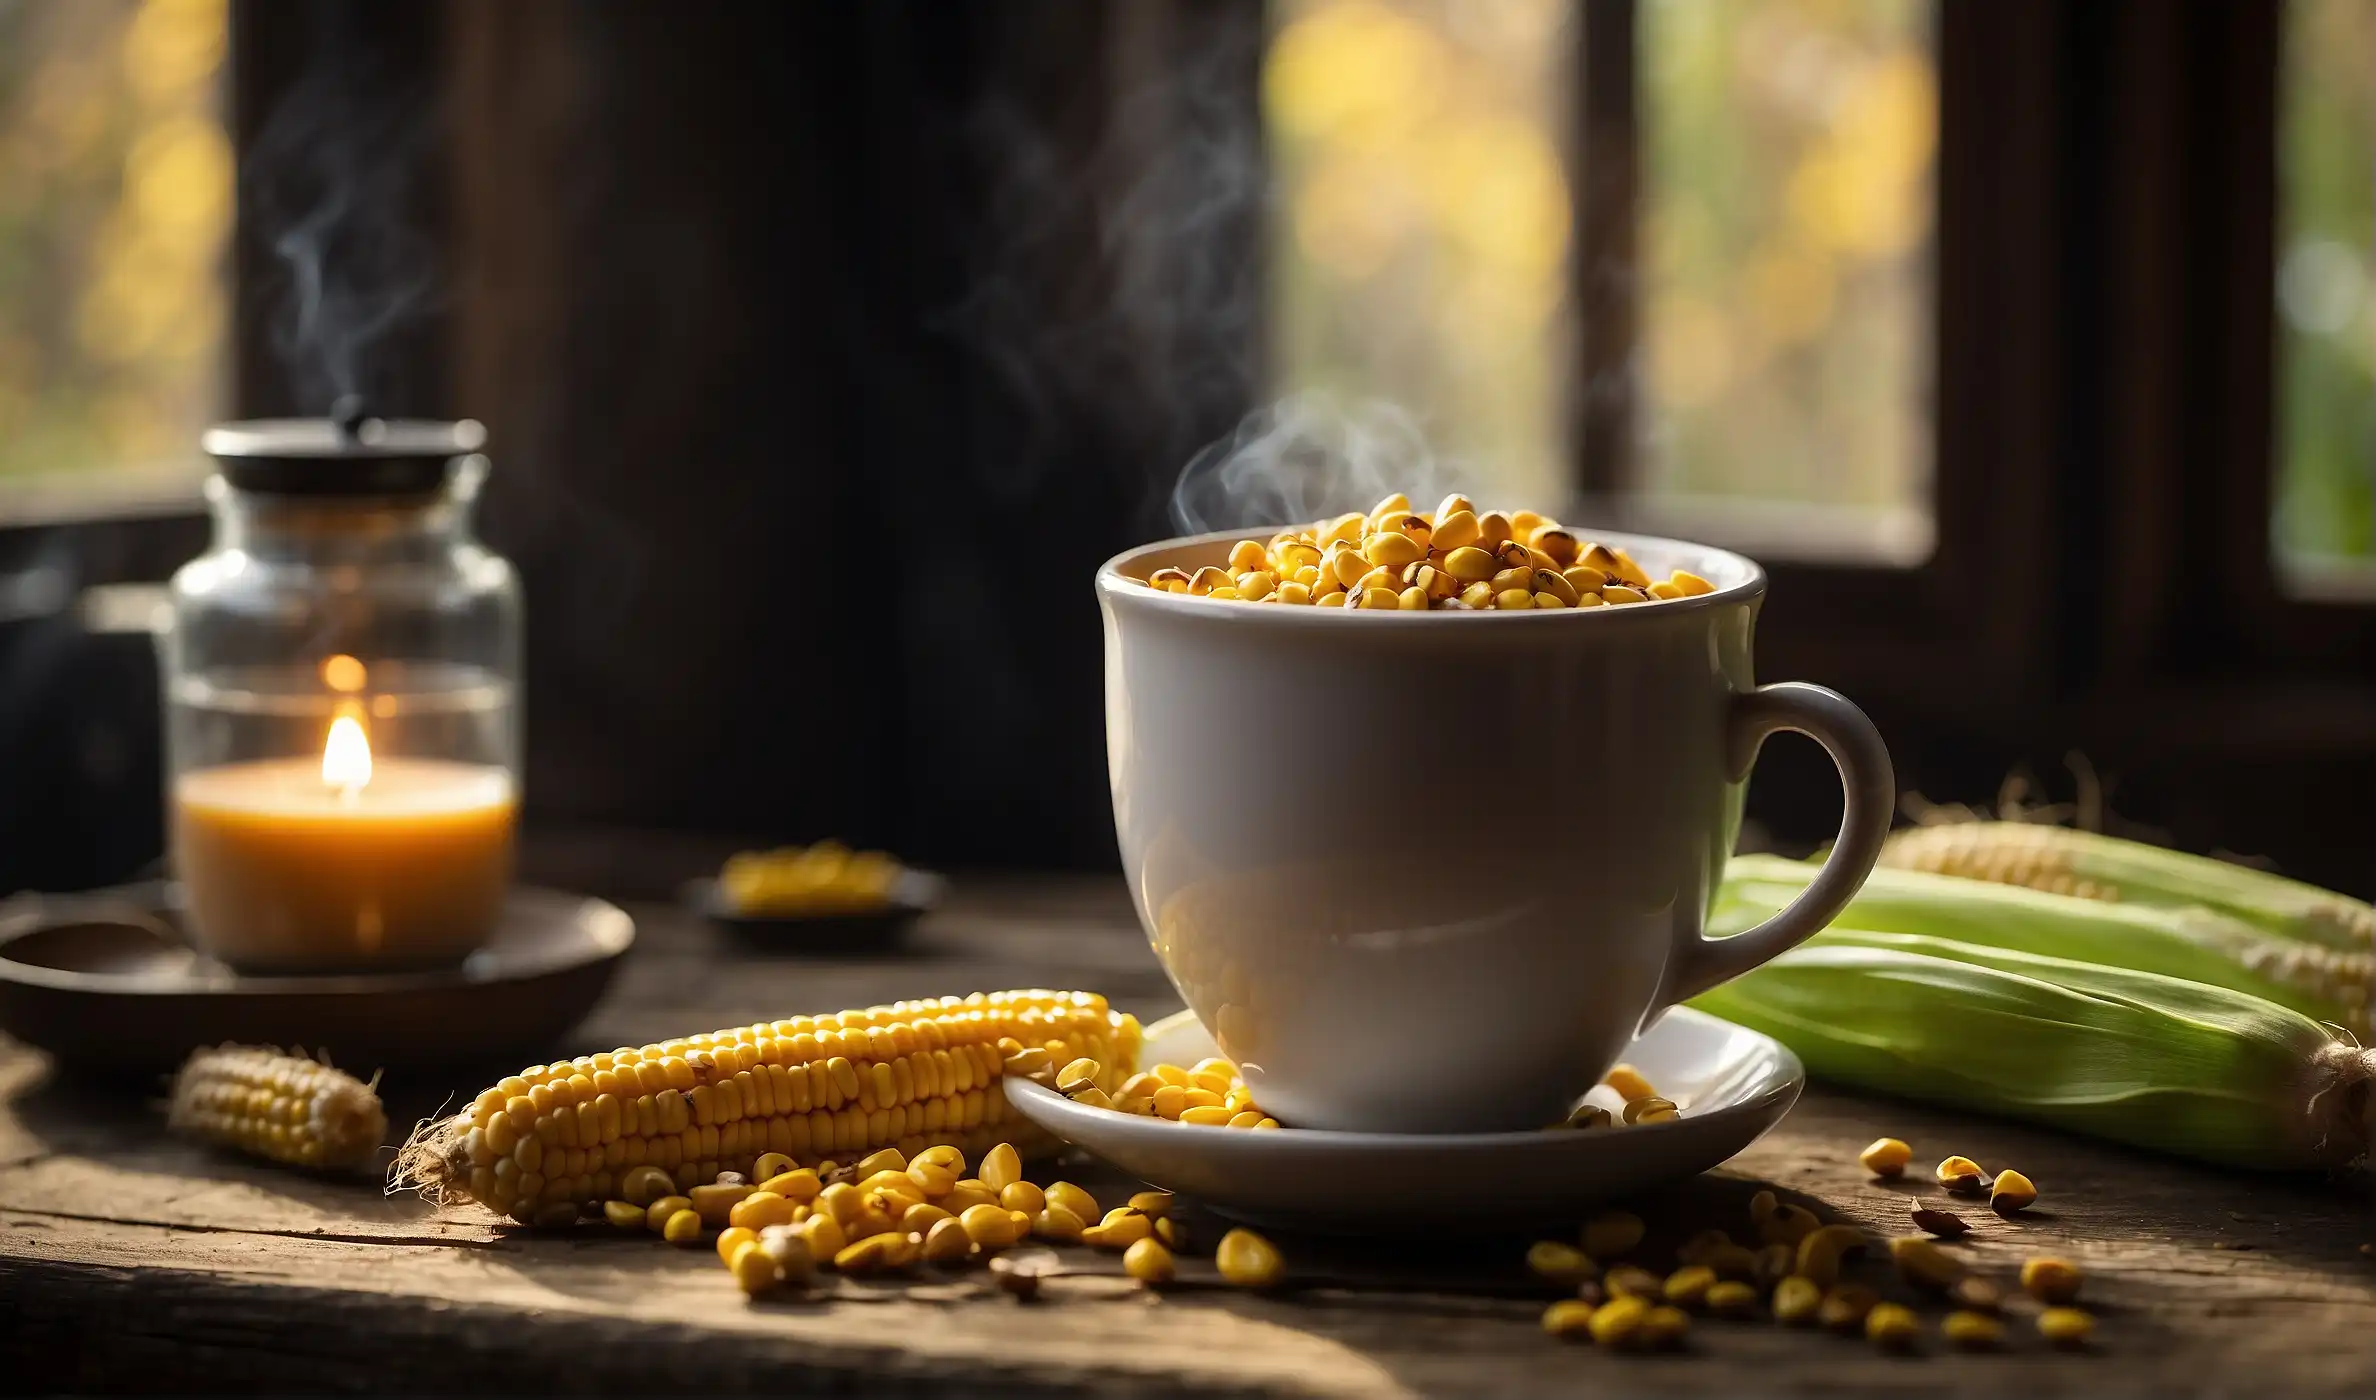 A cup of freshly brewed corn coffee